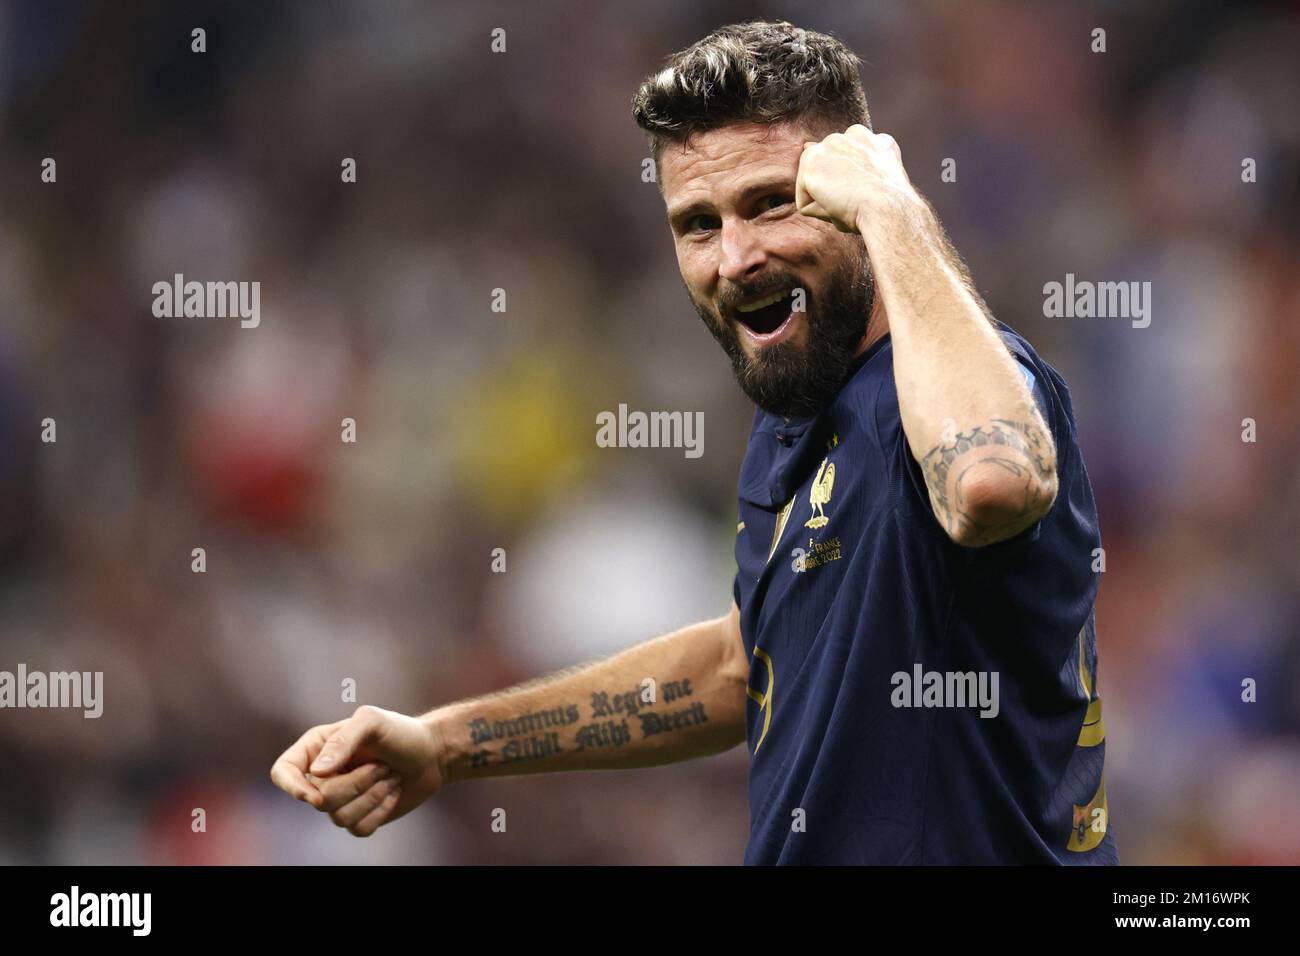 AL KHOR - Olivier Giroud of France celebrate the 1-2 draw during the FIFA World Cup Qatar 2022 quarter final match between England and France at Al Bayt Stadium on December 10, 2022 in Al Khor, Qatar. AP | Dutch Height | MAURICE OF STONE Credit: ANP/Alamy Live News Stock Photo